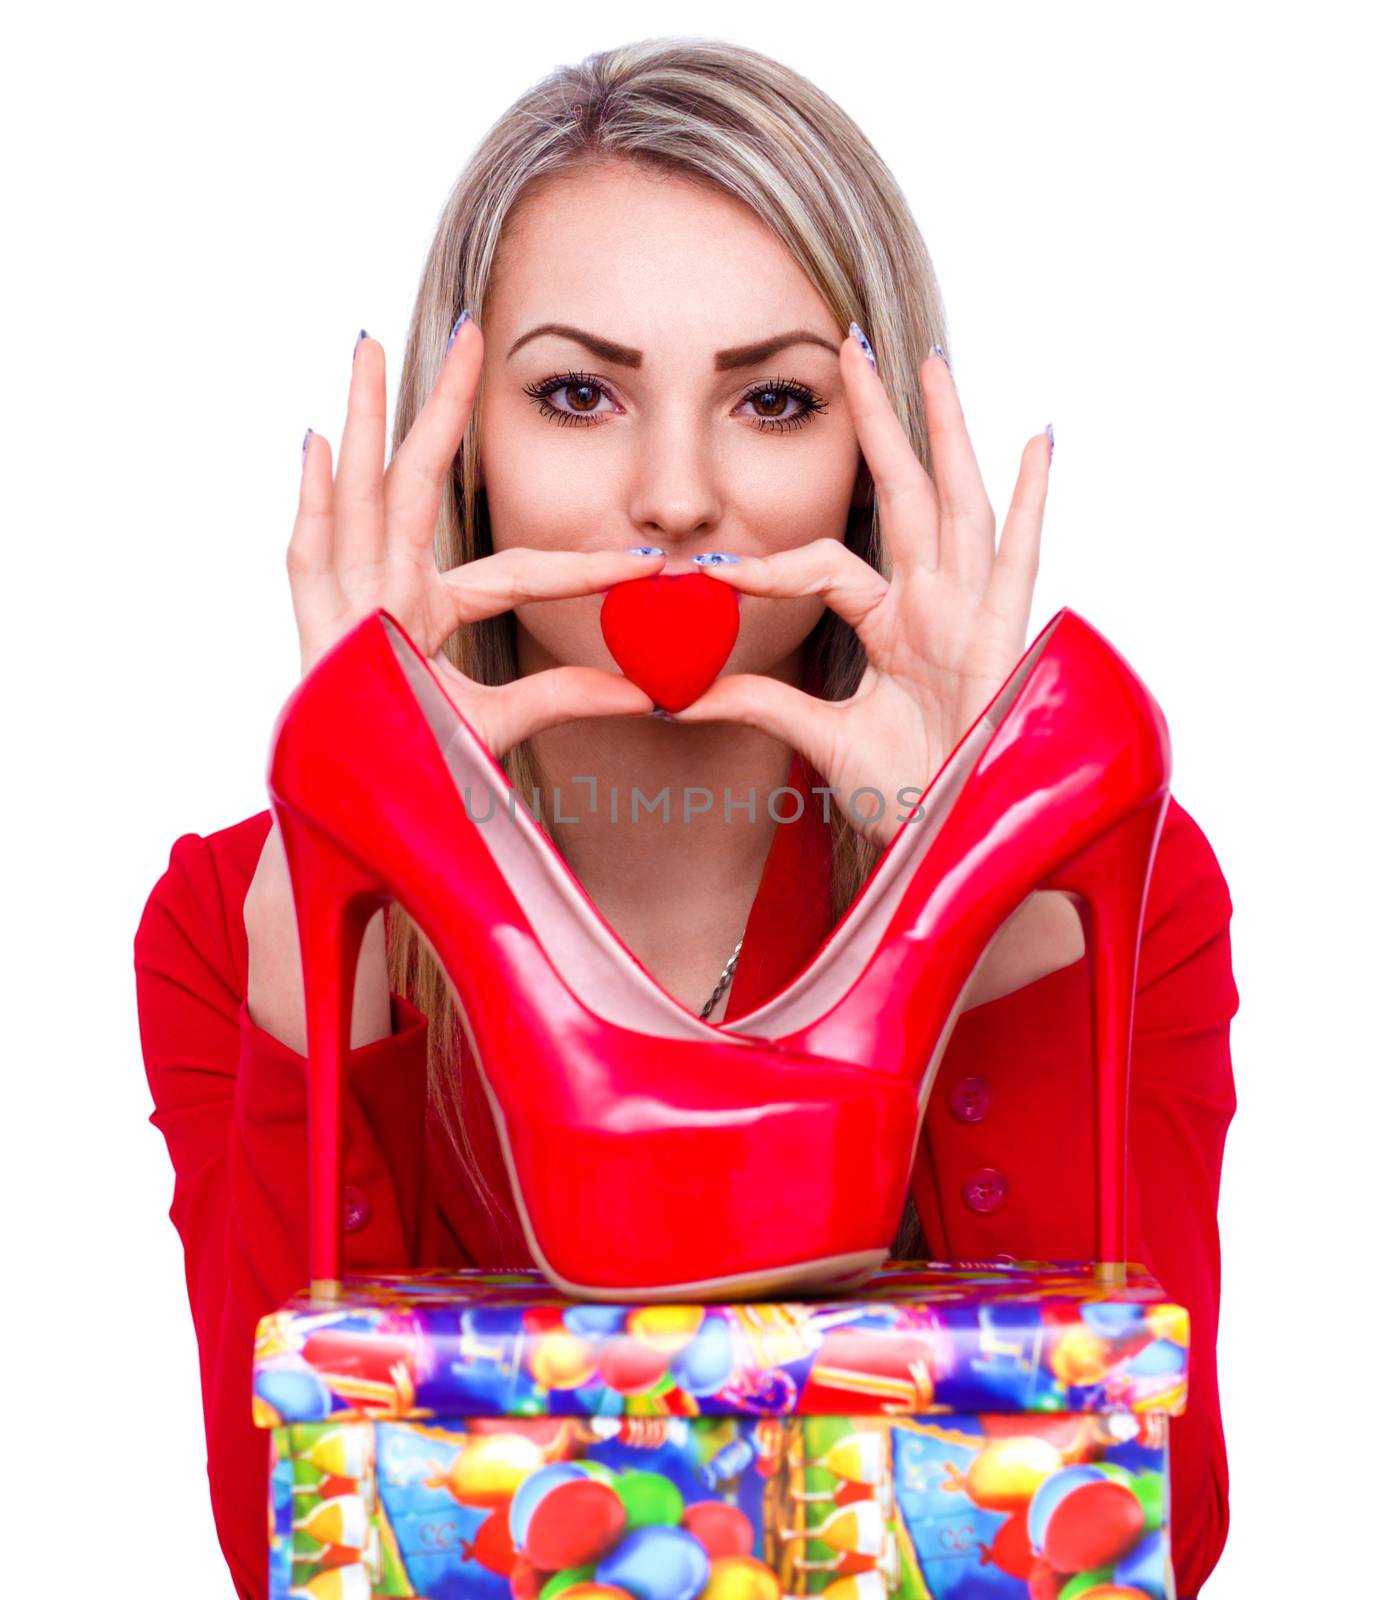 Young beautiful woman happy to receive red high heels shoes as a present
 by id7100